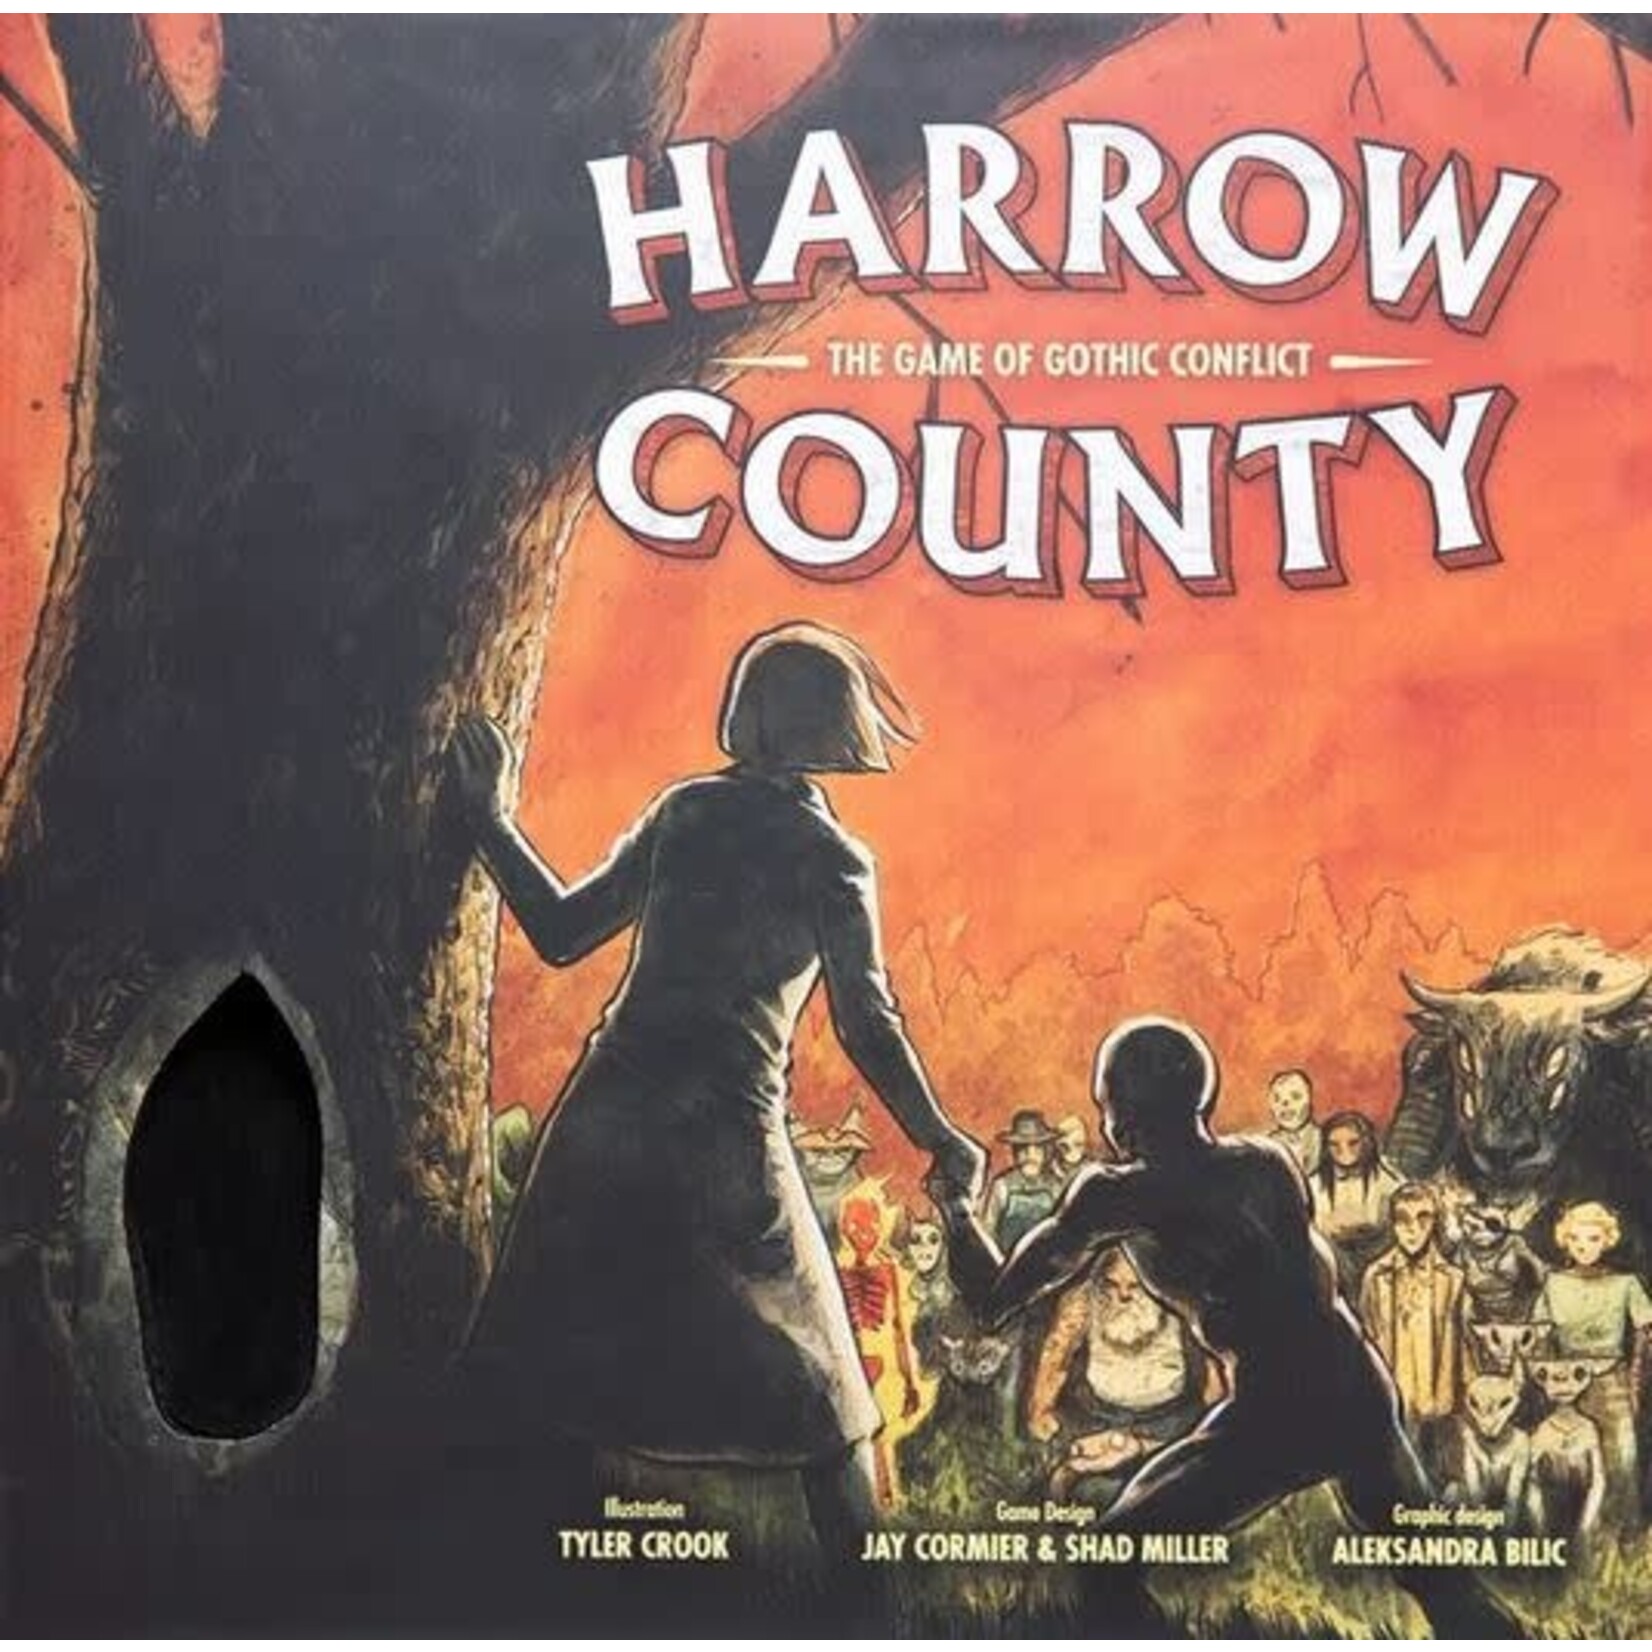 Off The Page Games Harrow County: The Game of Gothic Conflict